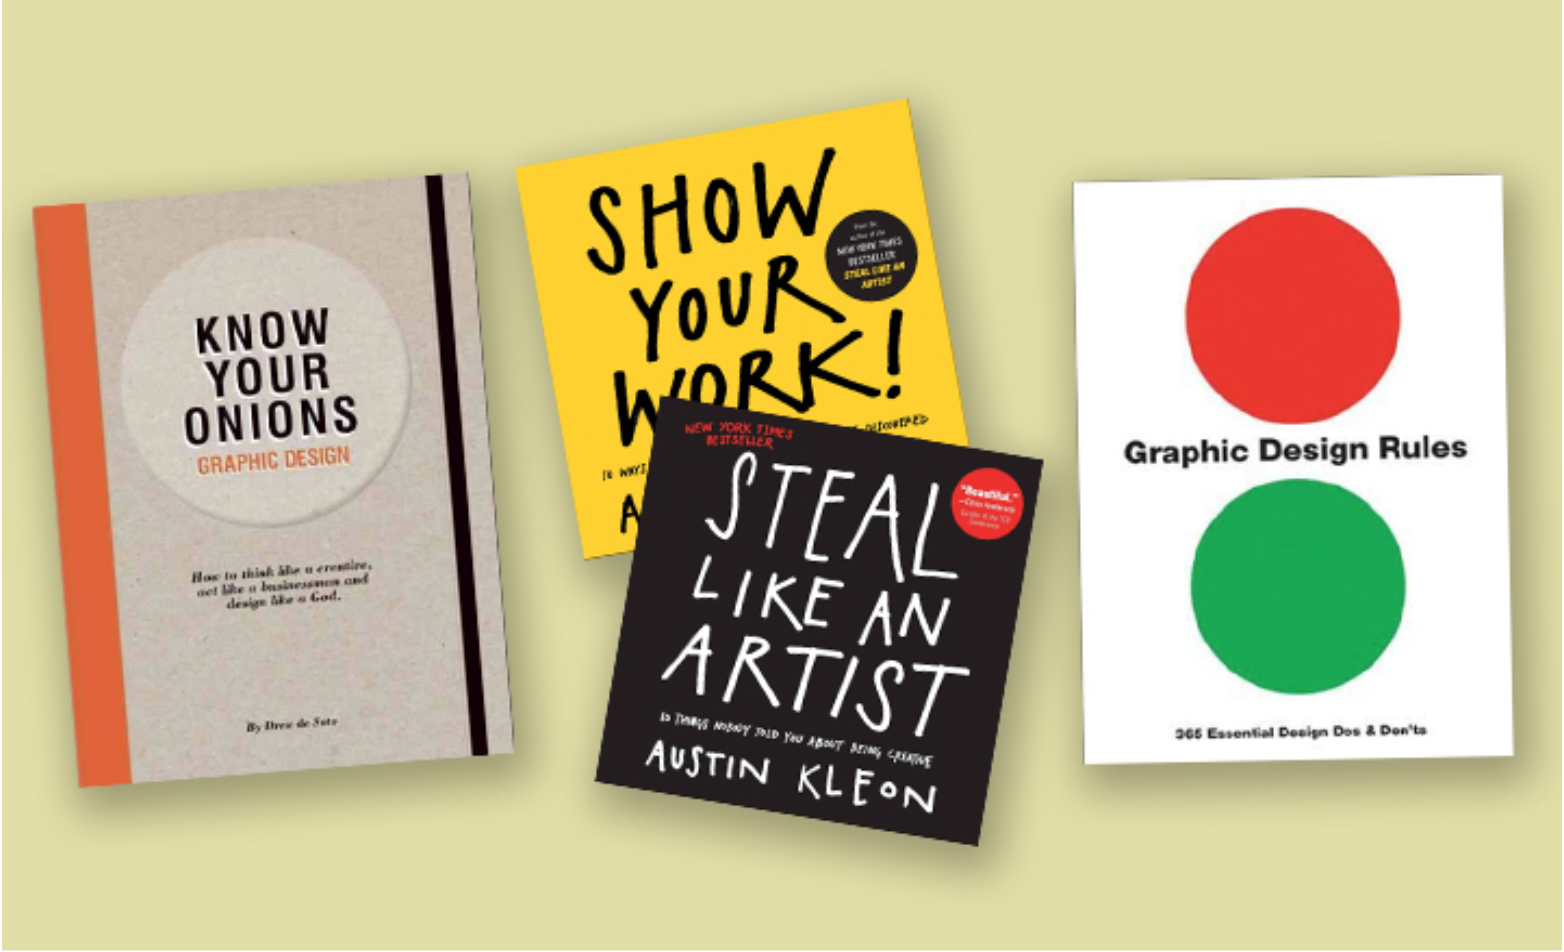 The best graphic design books on branding, logos, type and more